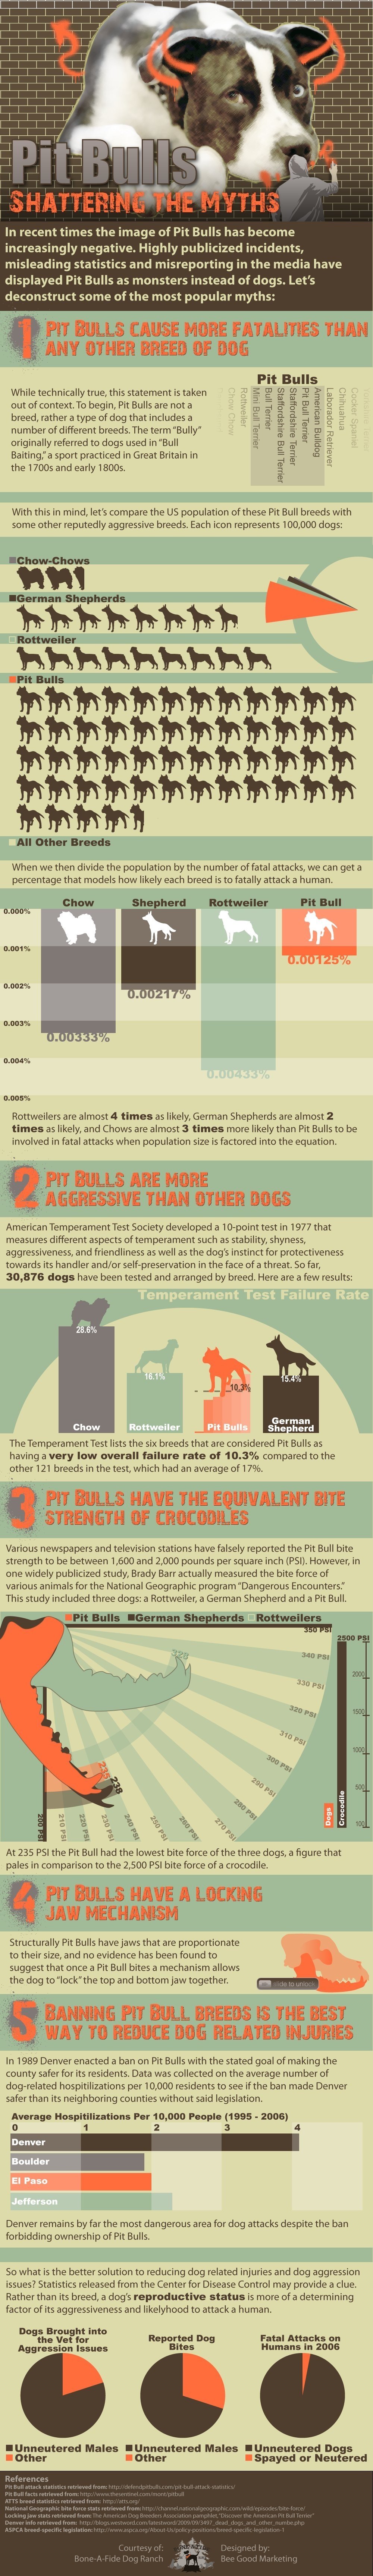 Common myths about the Pit Bull.